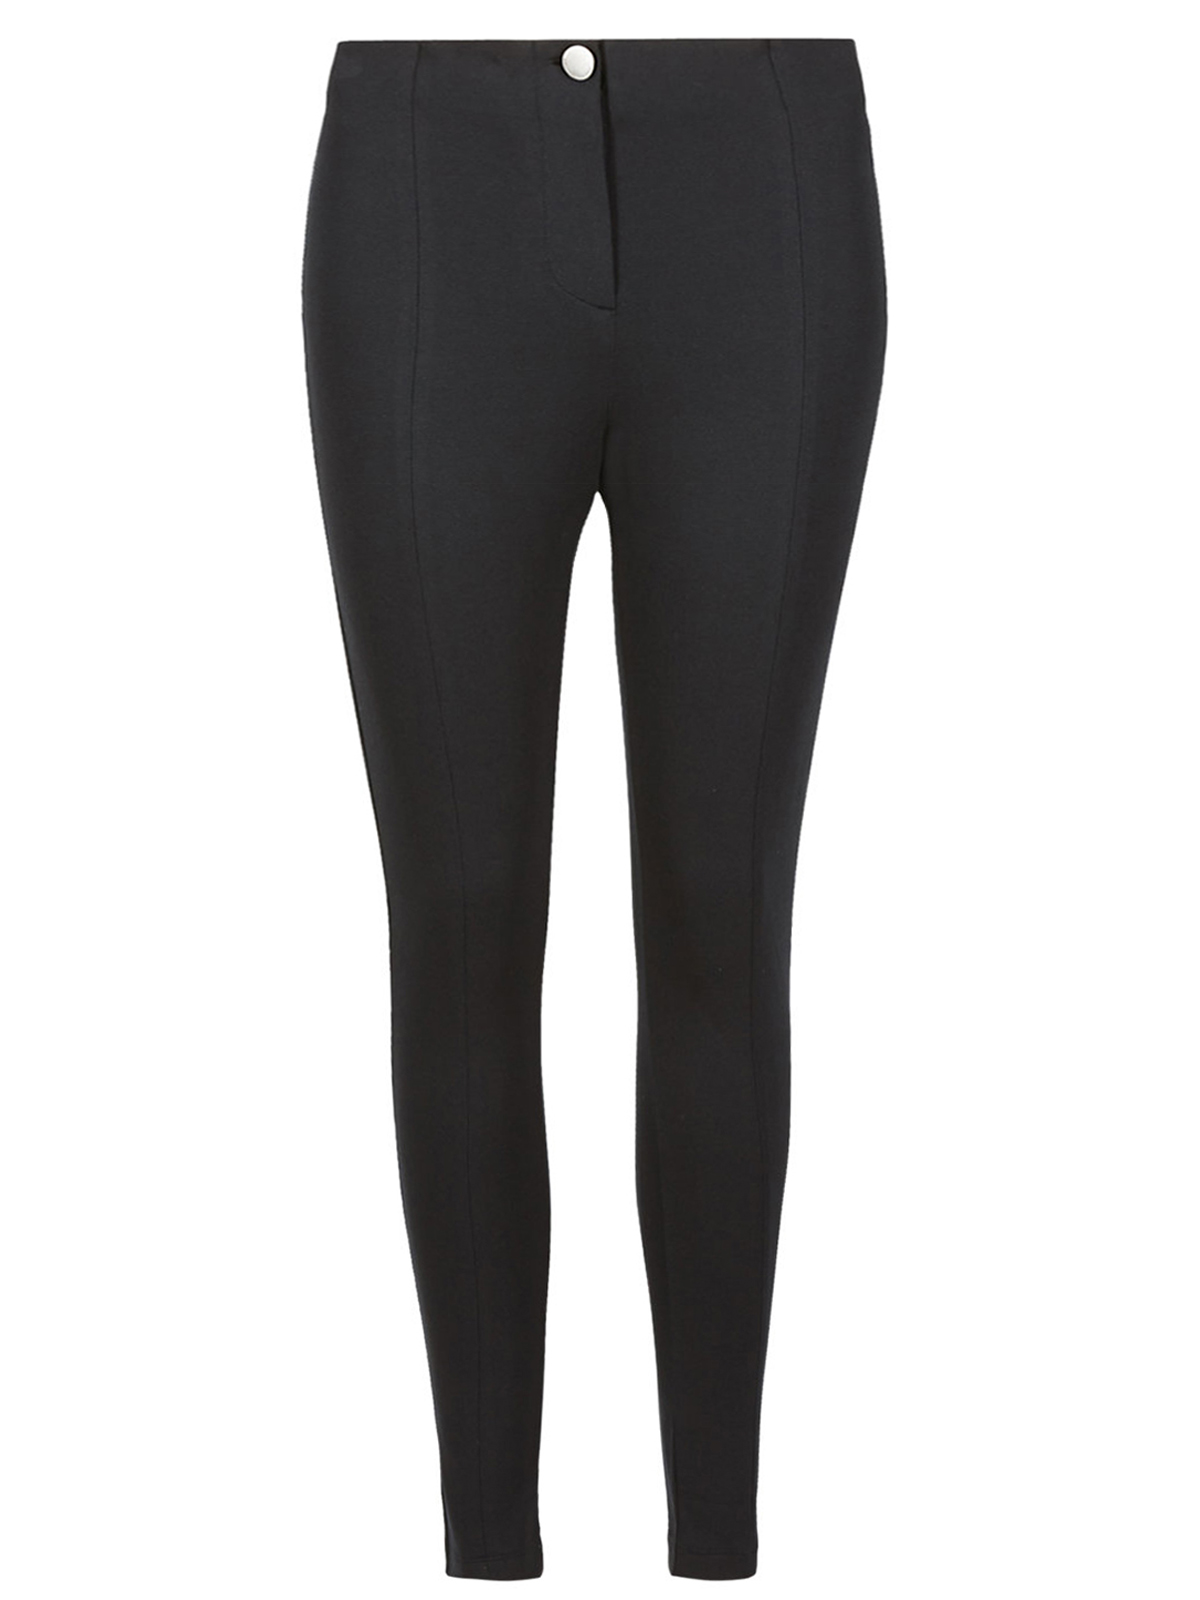 Marks and Spencer - - M&5 BLACK High Waisted Seam Leggings - Size 8 to 14